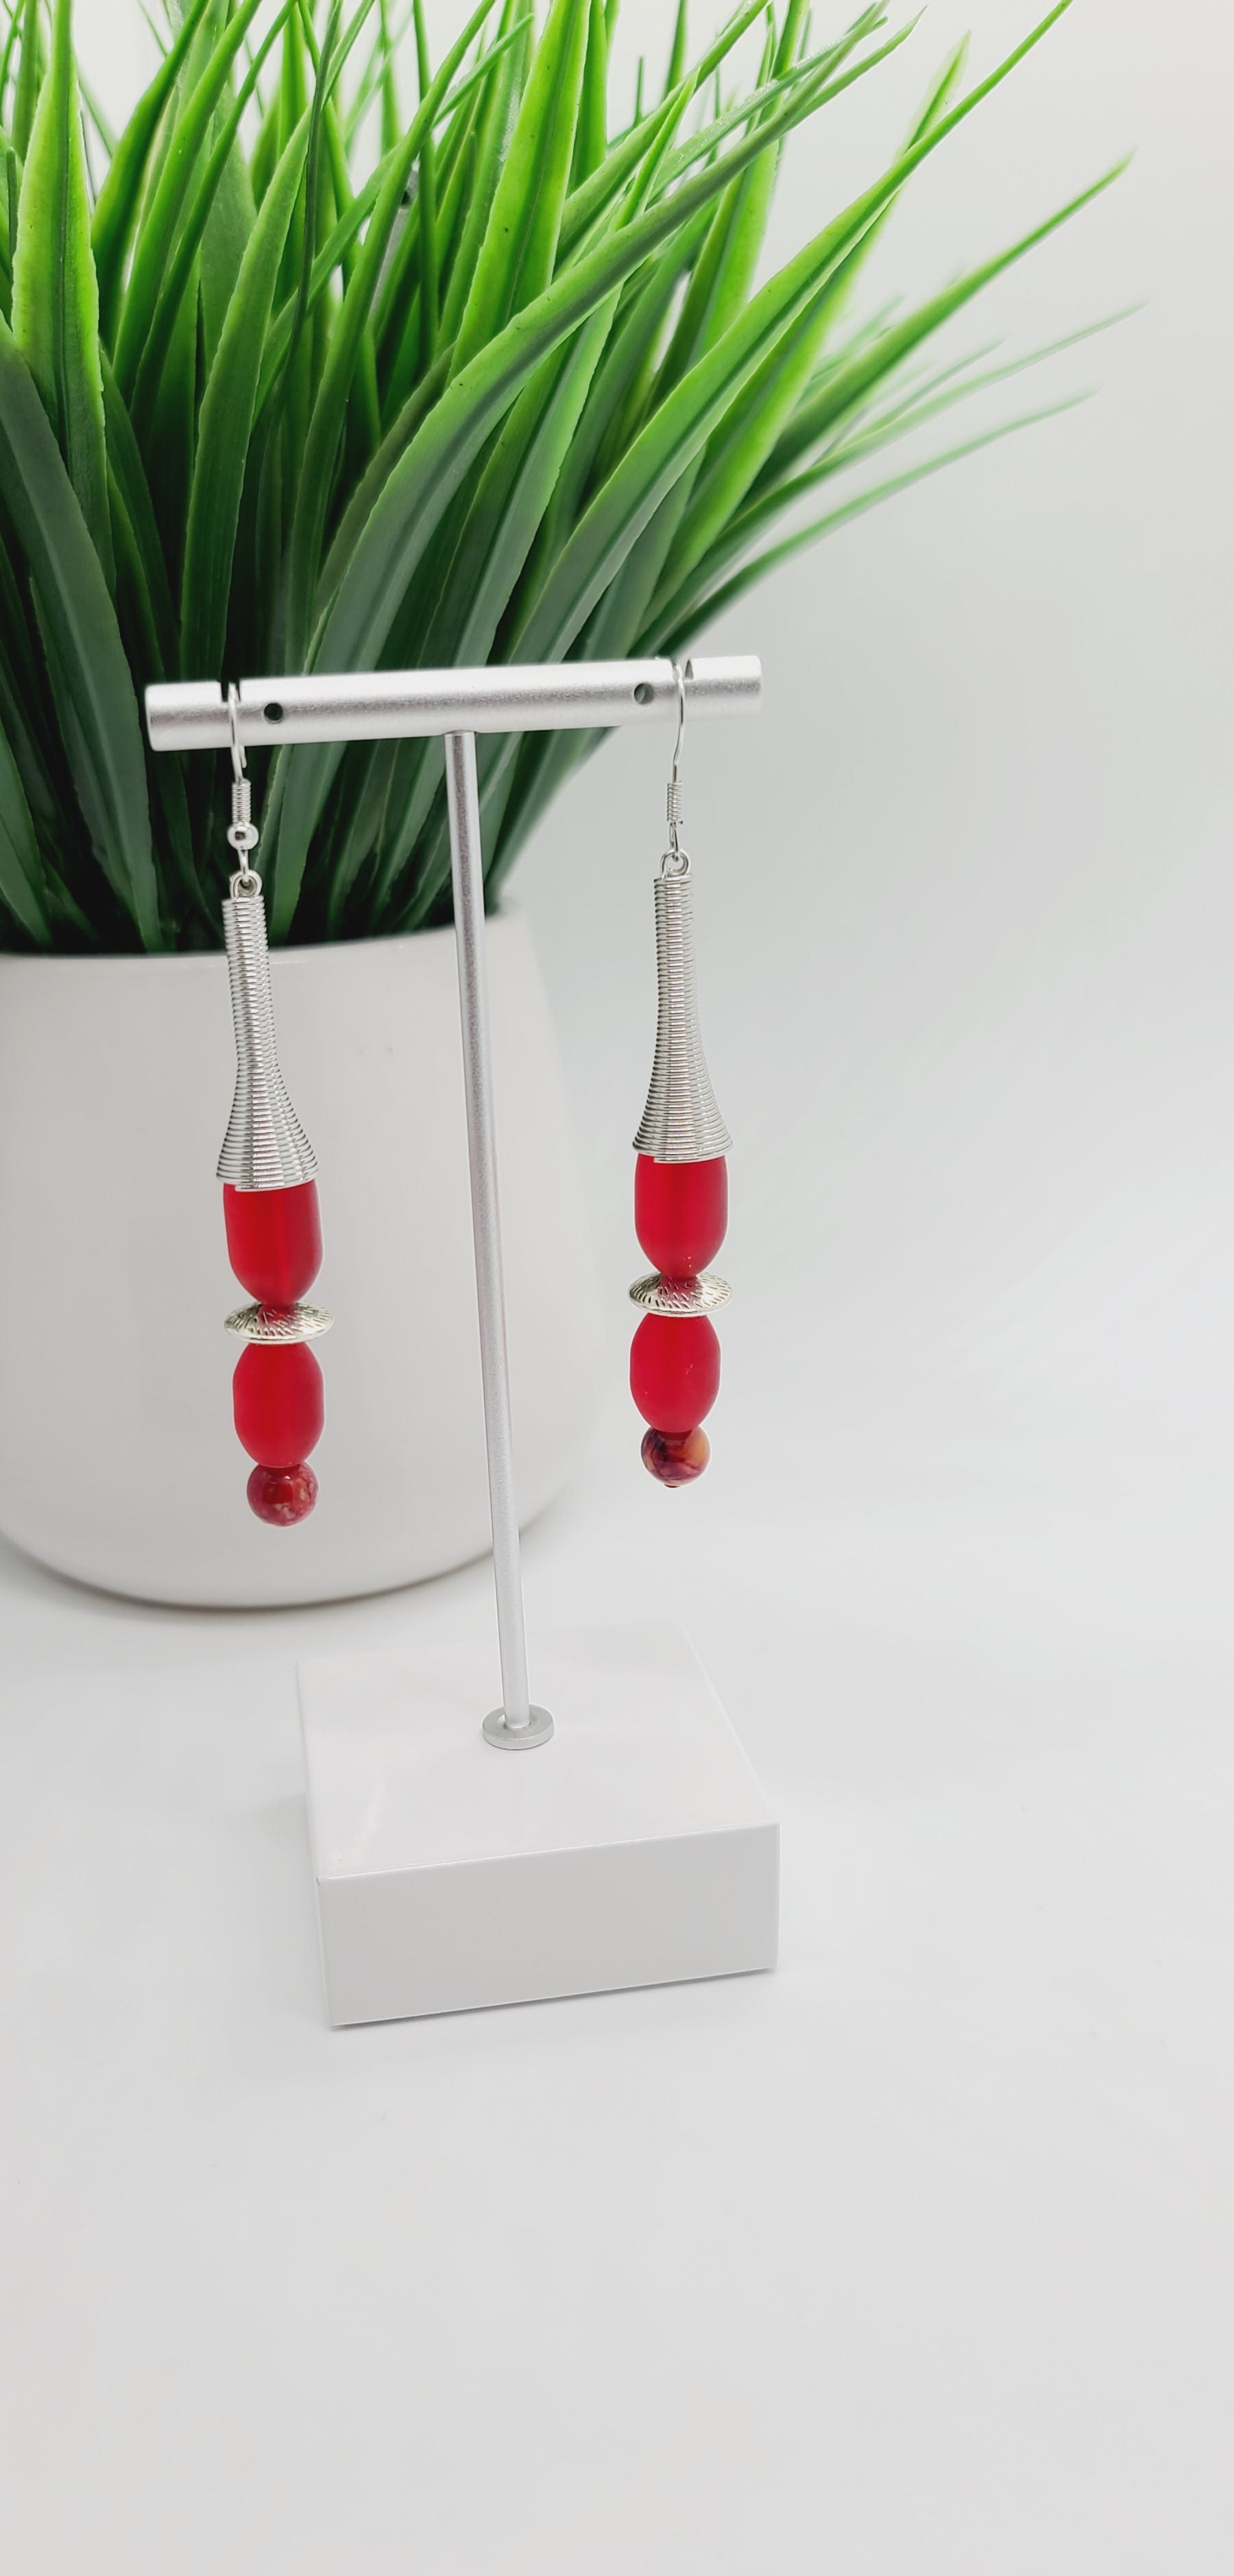 Length: 3.5 inches | Weight: 0.6 ounces  Distinctly You! These earrings are made with silver spring charms, silver rondelles, 12mm and 10mm oblong frosted red glass beads, and 6mm red marble glass beads.